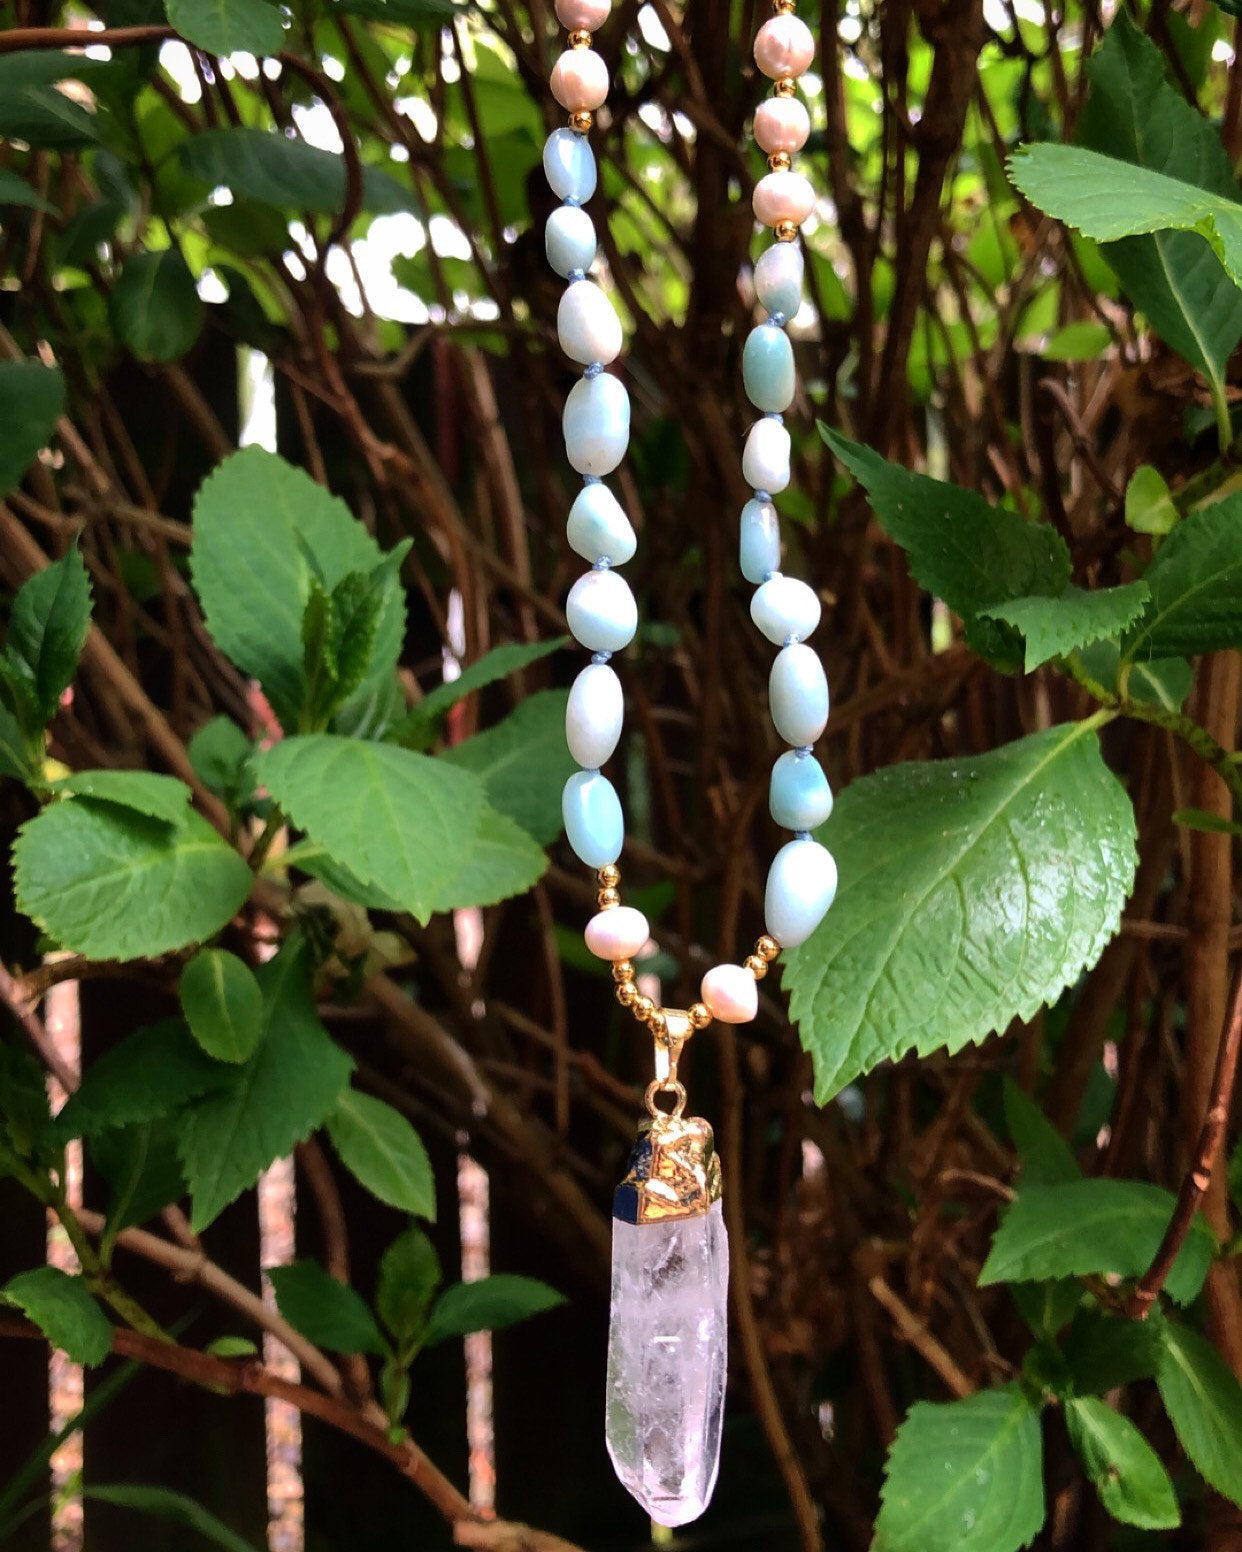 Amazonite, Mother of Pearl and Clear Quartz Mala Necklace